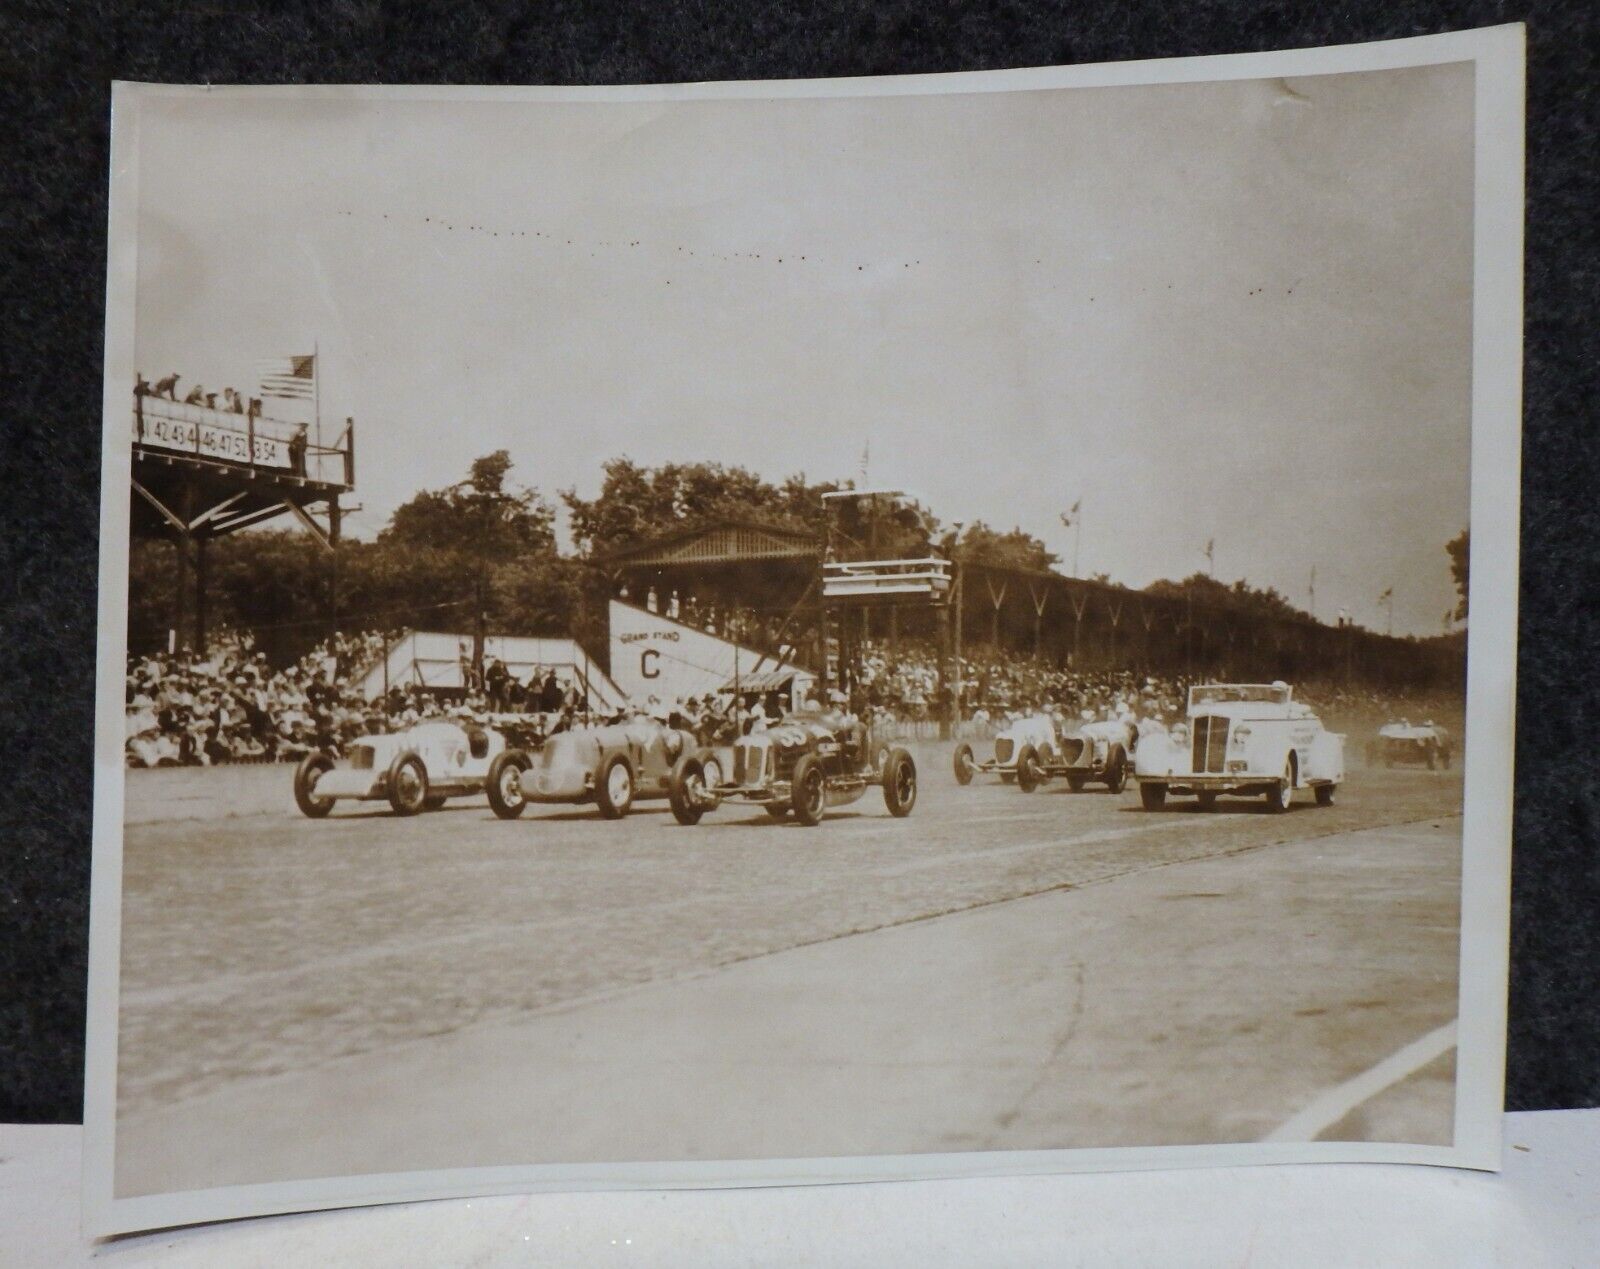 ORIGINAL VINTAGE 1930s Indianapolis 500 INDY 500 RACE CAR STARTING LINE UP PHOTO